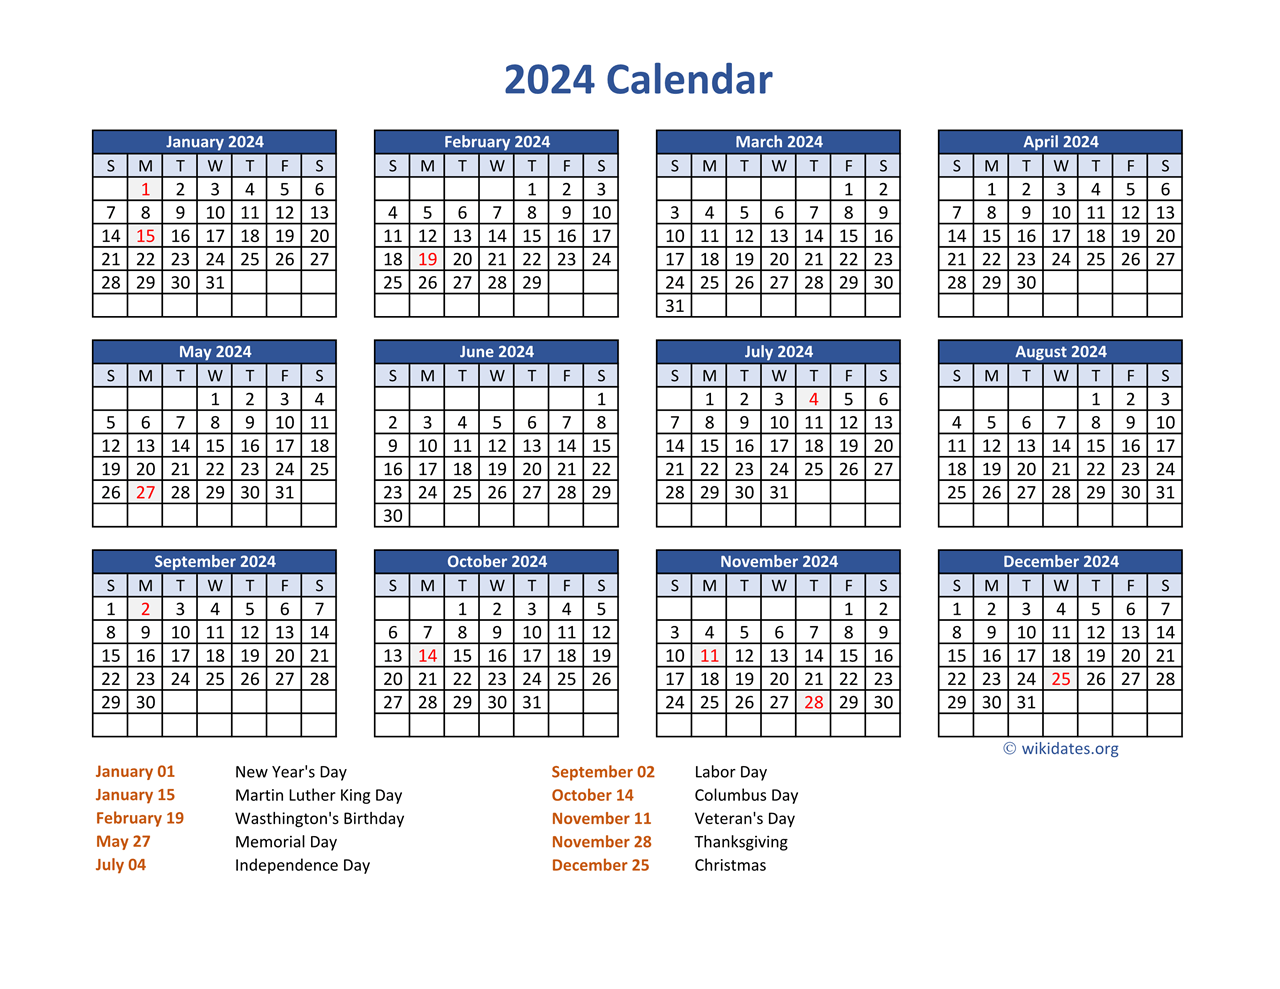 Pdf Calendar 2024 With Federal Holidays | Wikidates for 2024 Year Calendar Printable With Holidays